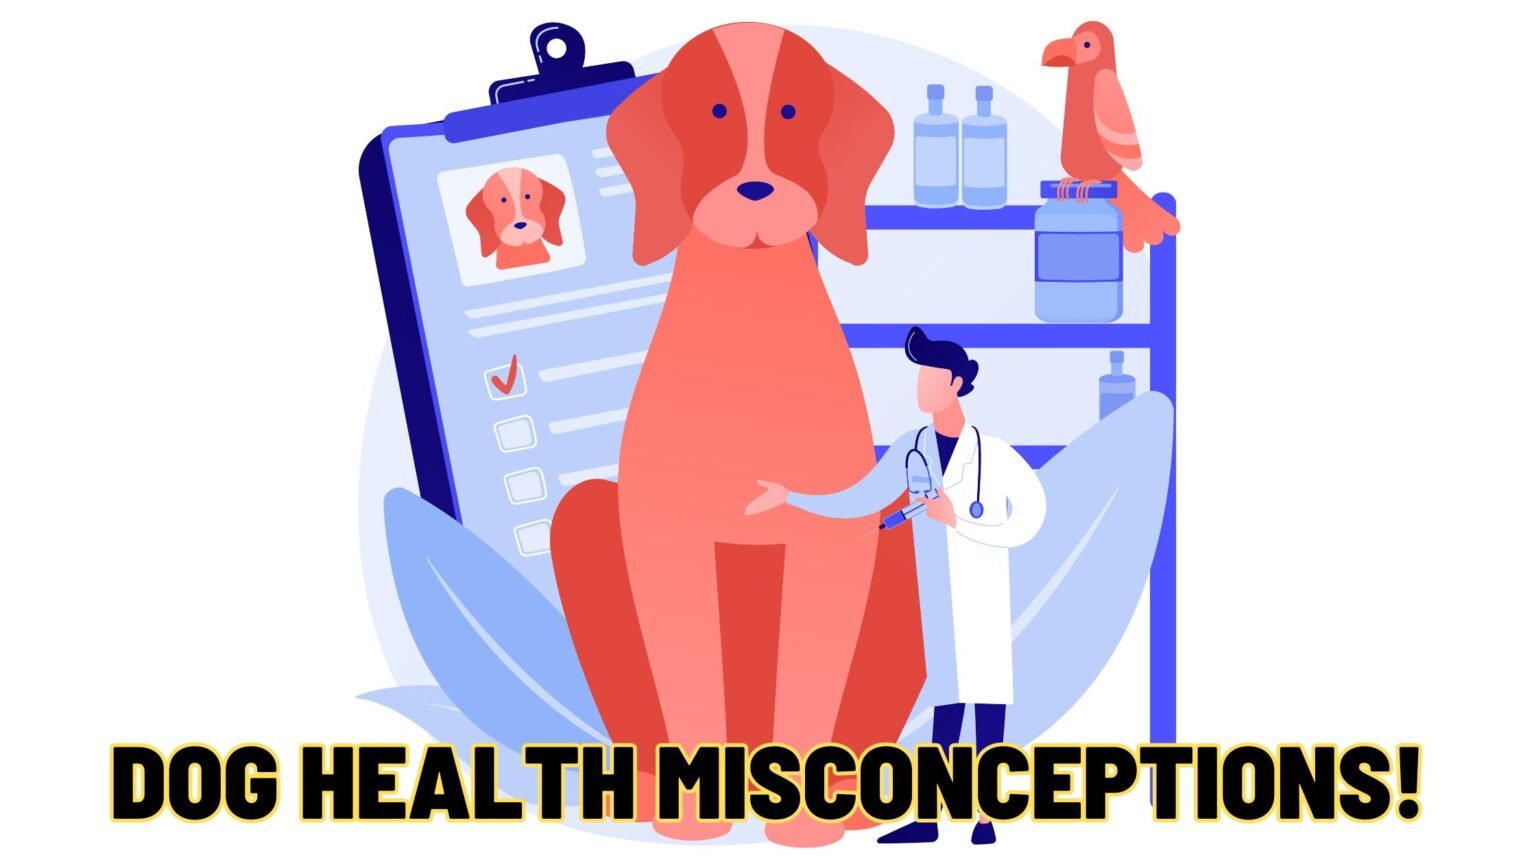 DOG HEALTH MISCONCEPTIONS